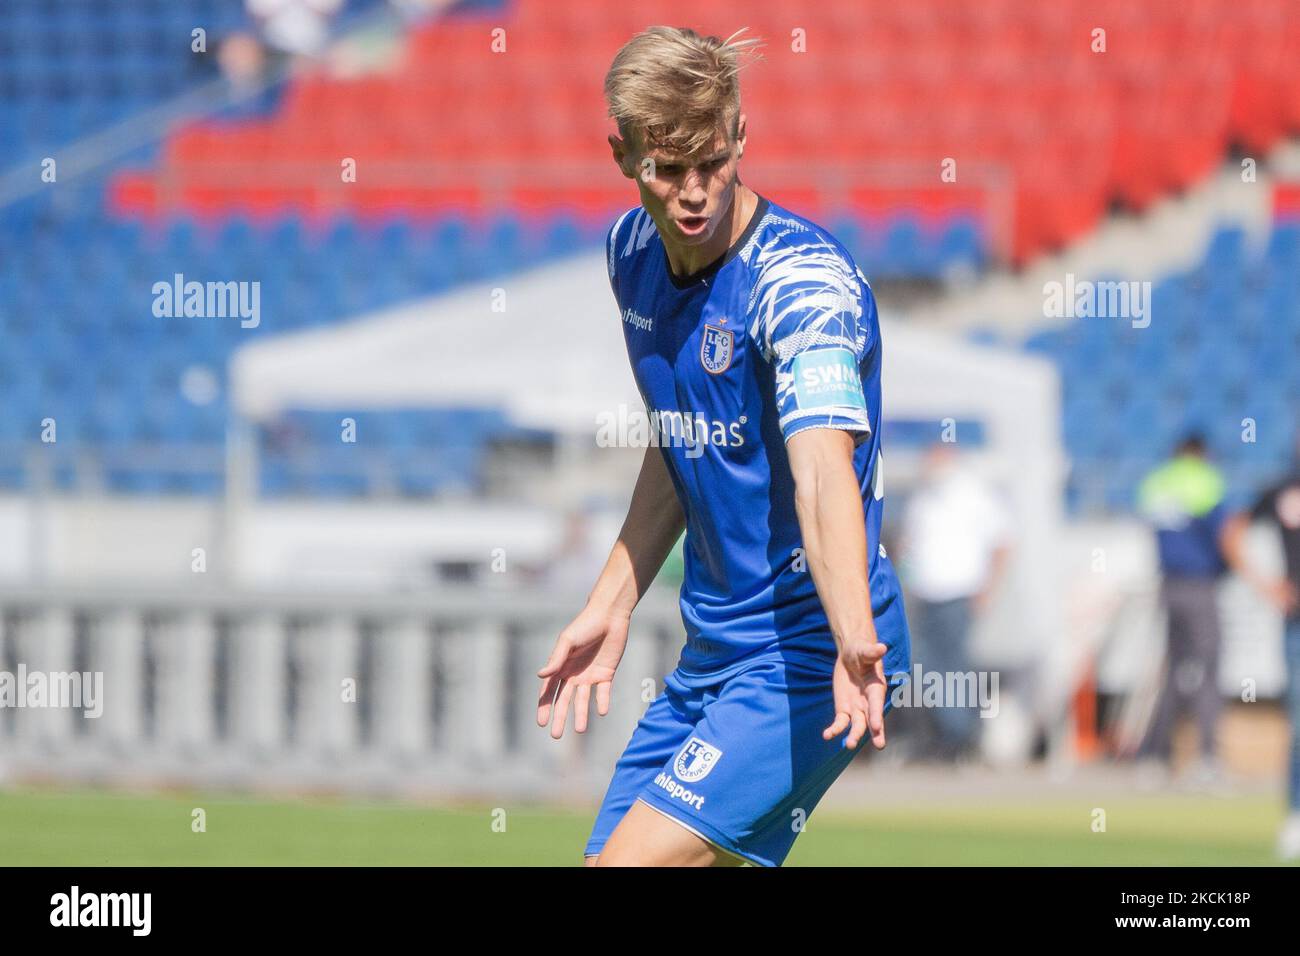 Luca Schuler of 1. FC Magdeburg reacts during the 3. Liga match between TSV Havelse and 1. FC Magdeburg at HDI-Arena on August 14, 2021 in Hanover, Germany. (Photo by Peter Niedung/NurPhoto) Stock Photo